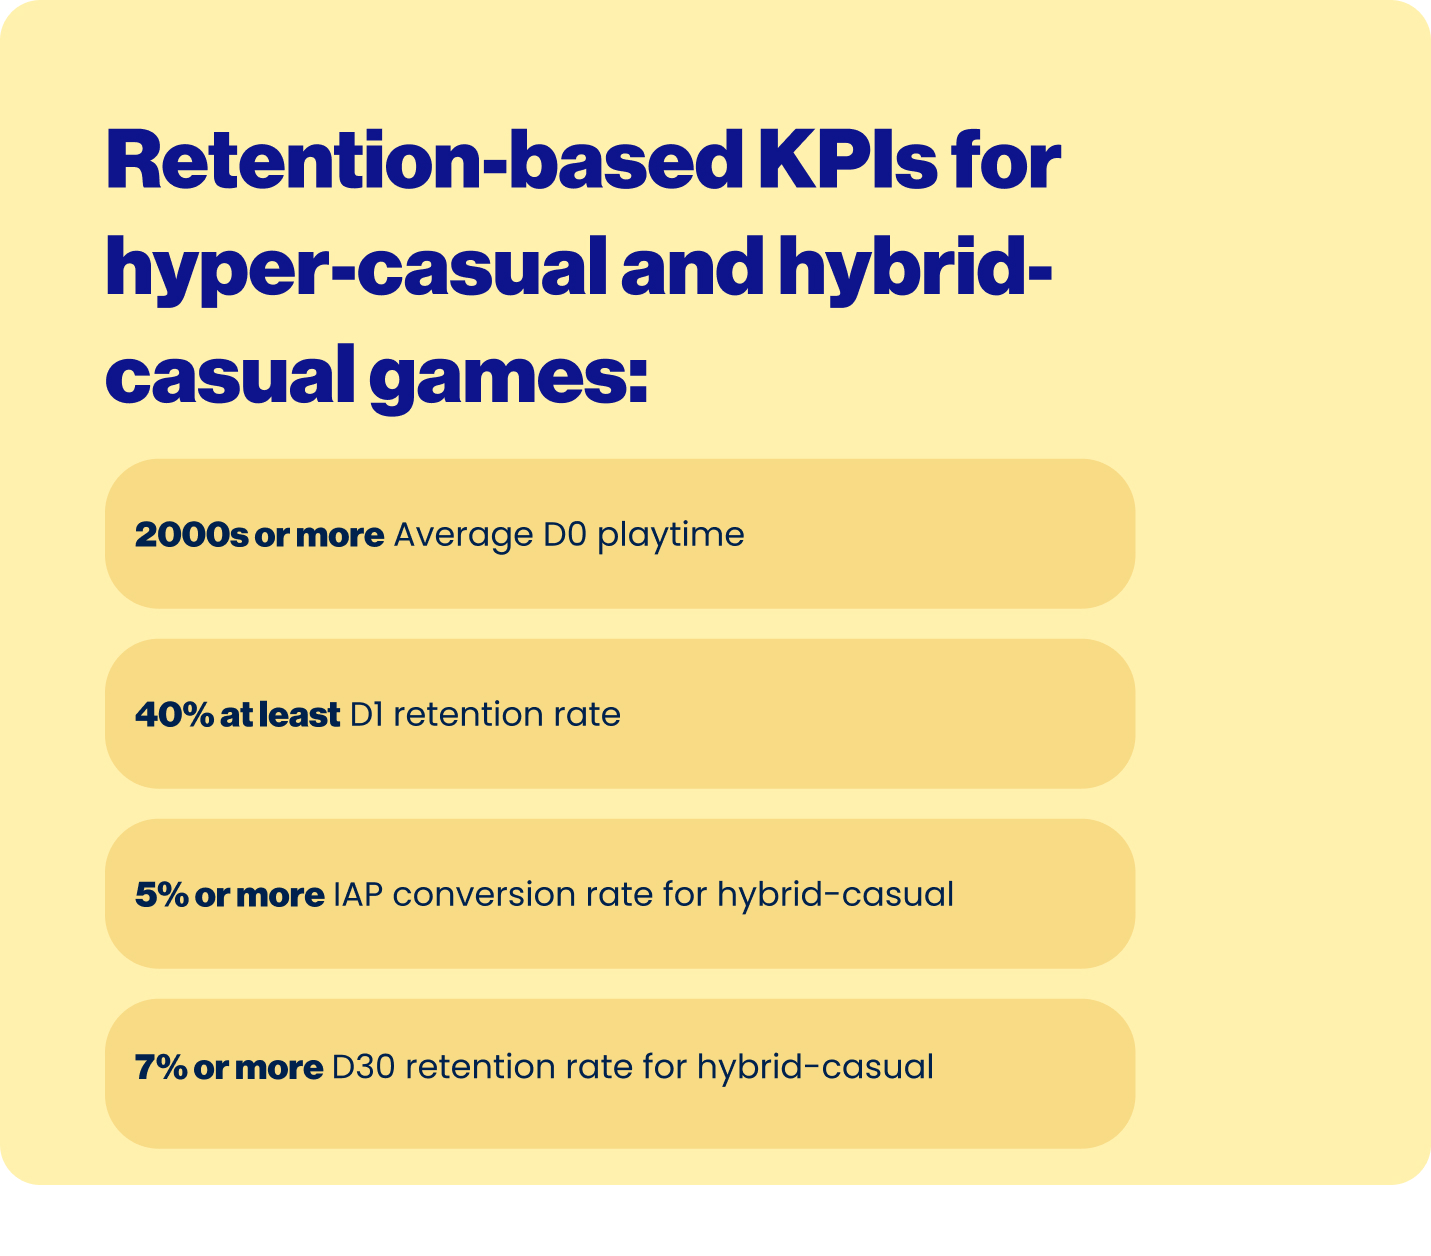 Retention-based KPIs for hyper-casual and hybrid-casual games